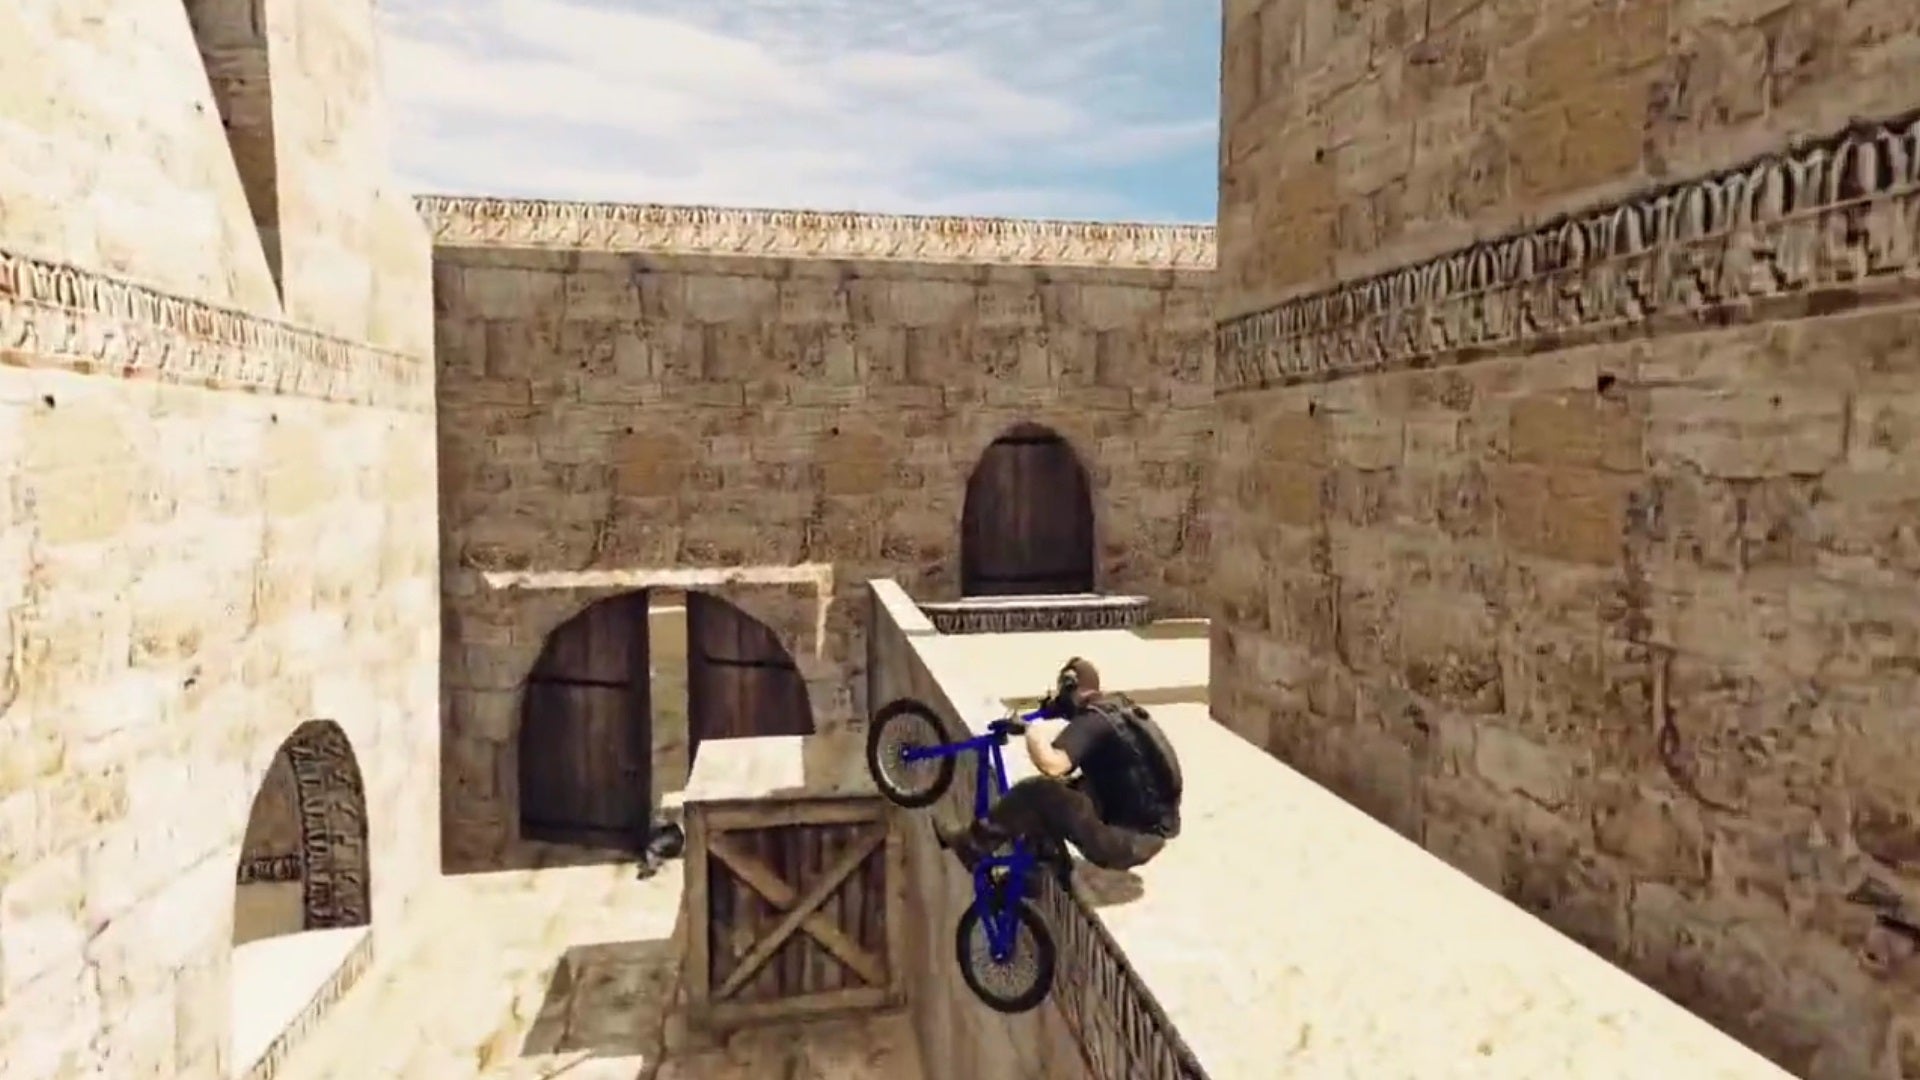 Image of Dust 2 from CSGO in the GTA 5 engine